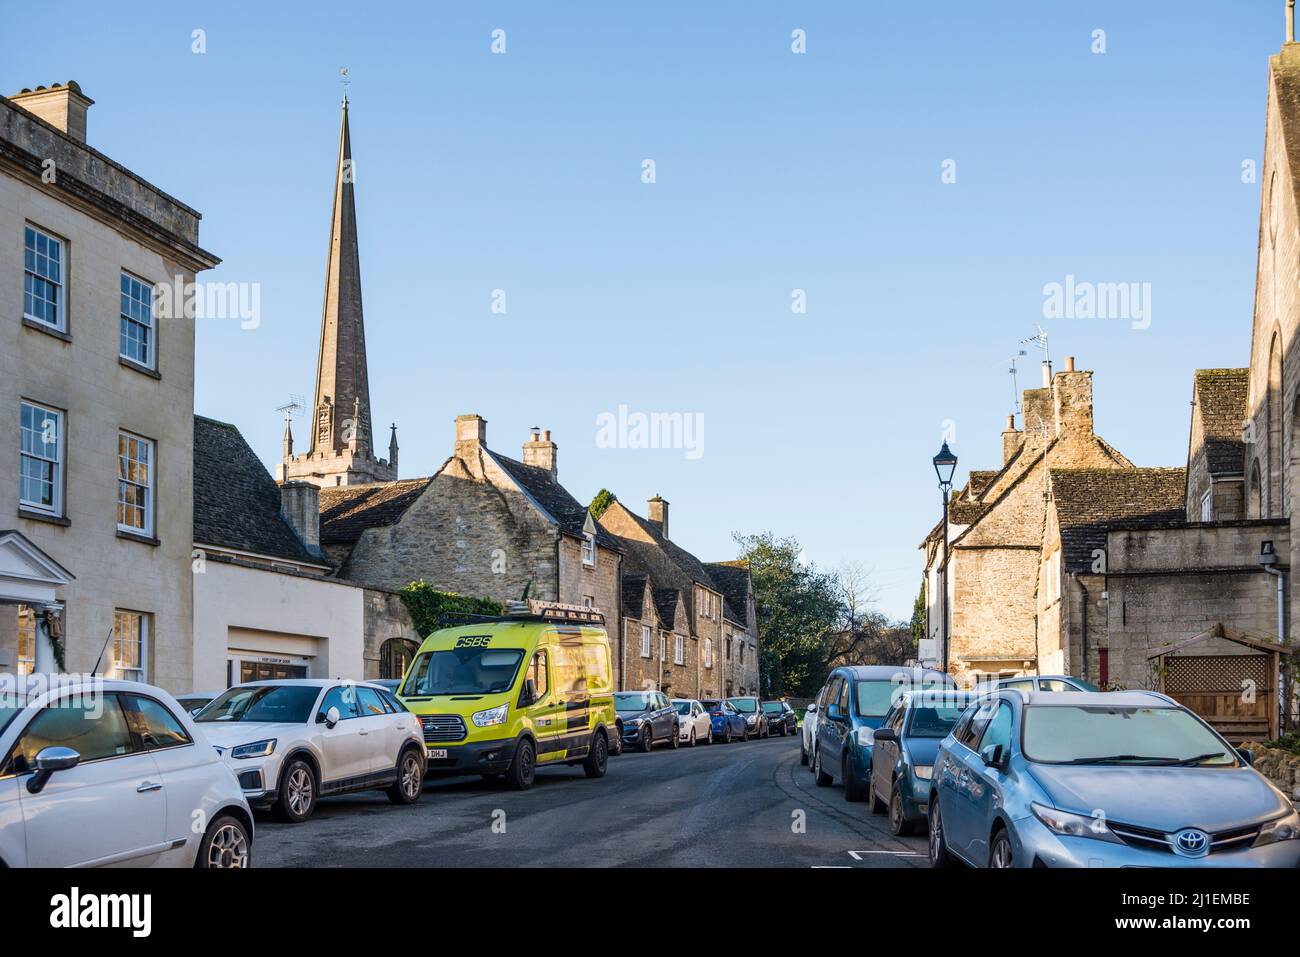 Too many cars parked along street outside of quintessential Cotswold stone cottages, Tetbury, Gloucestershire, UK Stock Photo